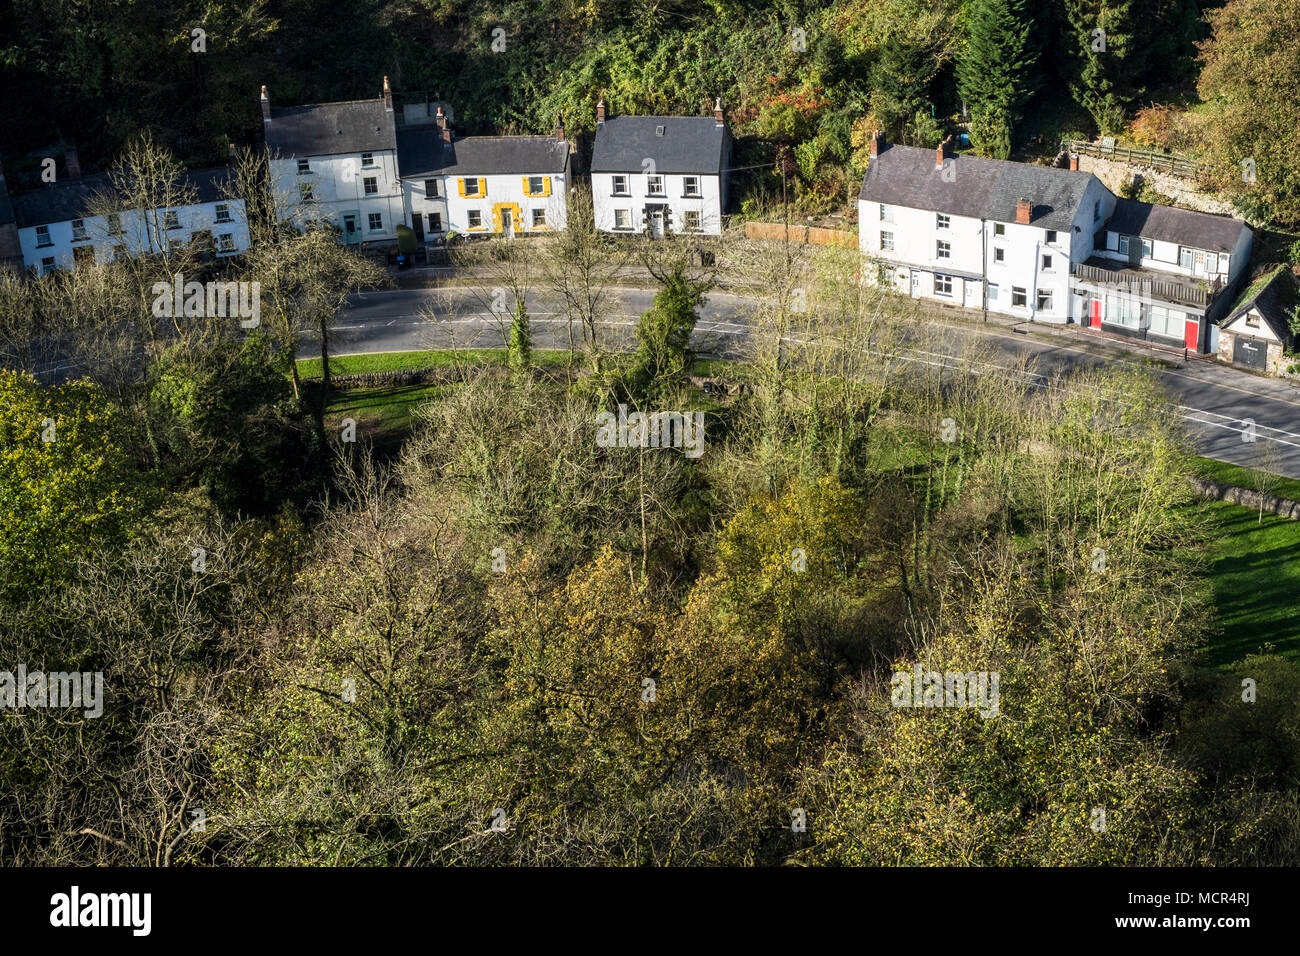 Looking down on houses and trees lit by Autumn light on a bend in the A6 road. Viewed from High Tor, Matlock, Derbyshire, England, UK Stock Photo